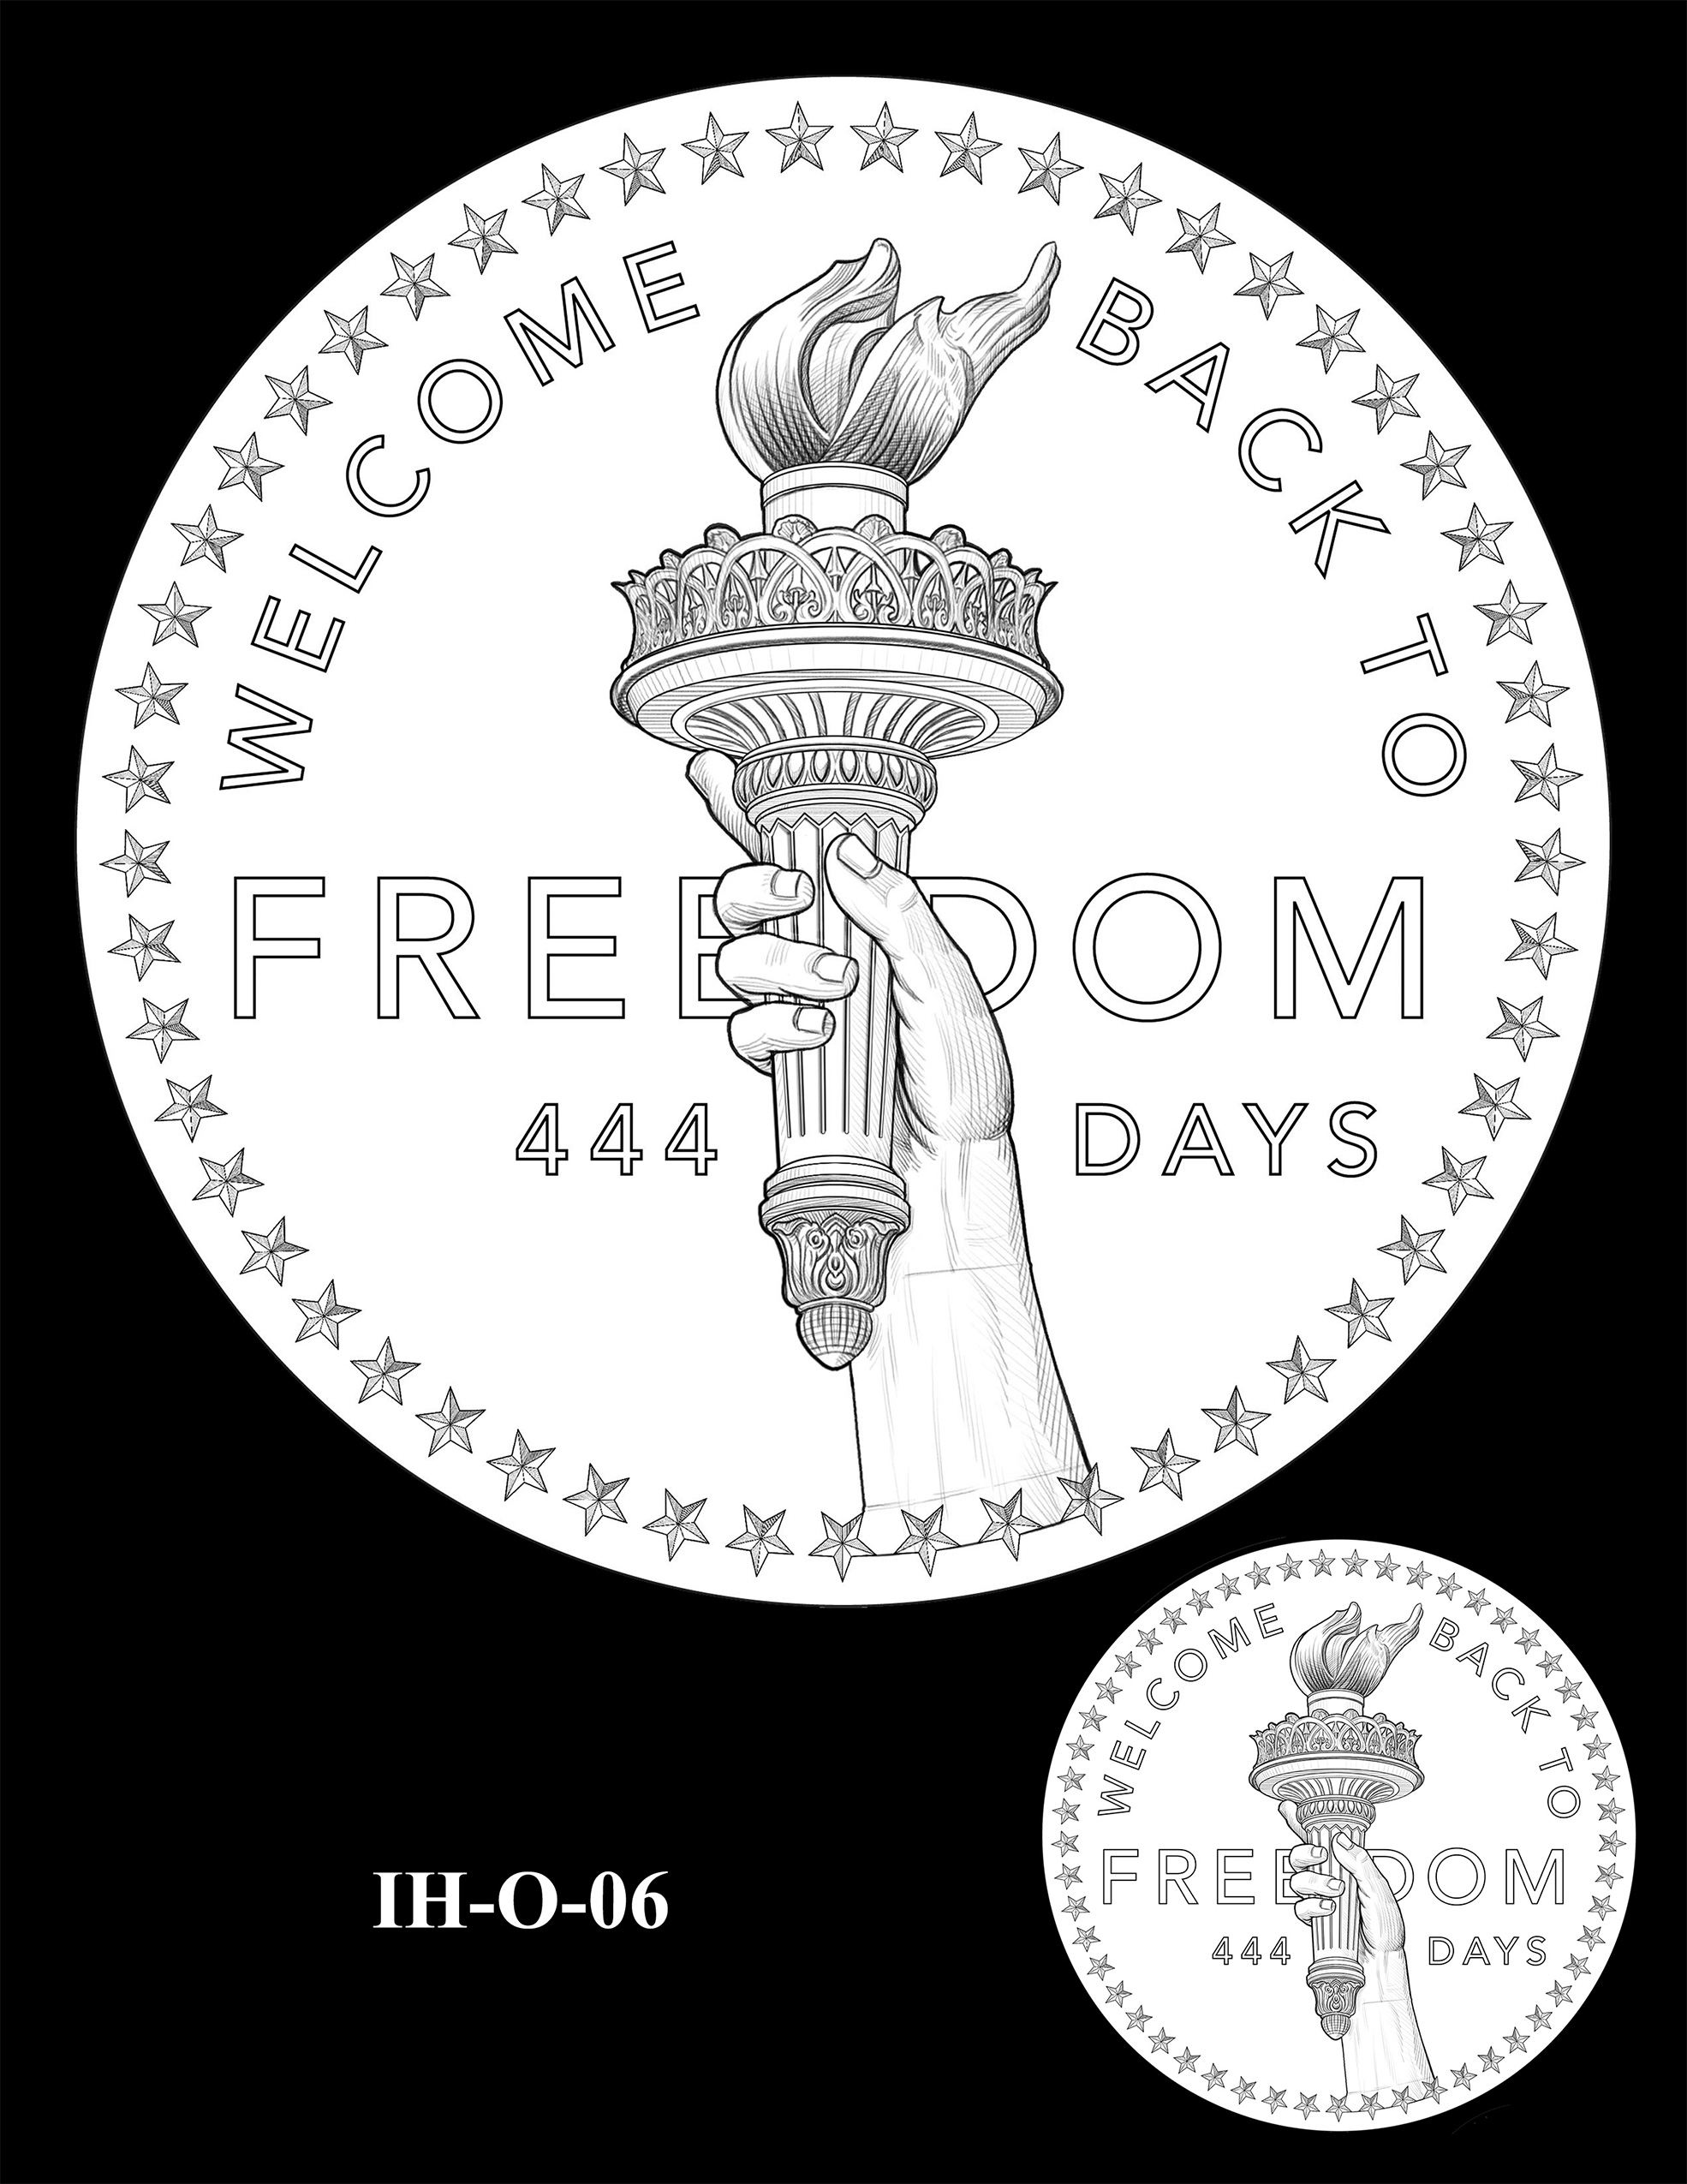 IH-O-06 -- Iran Hostages Congressional Gold Medal